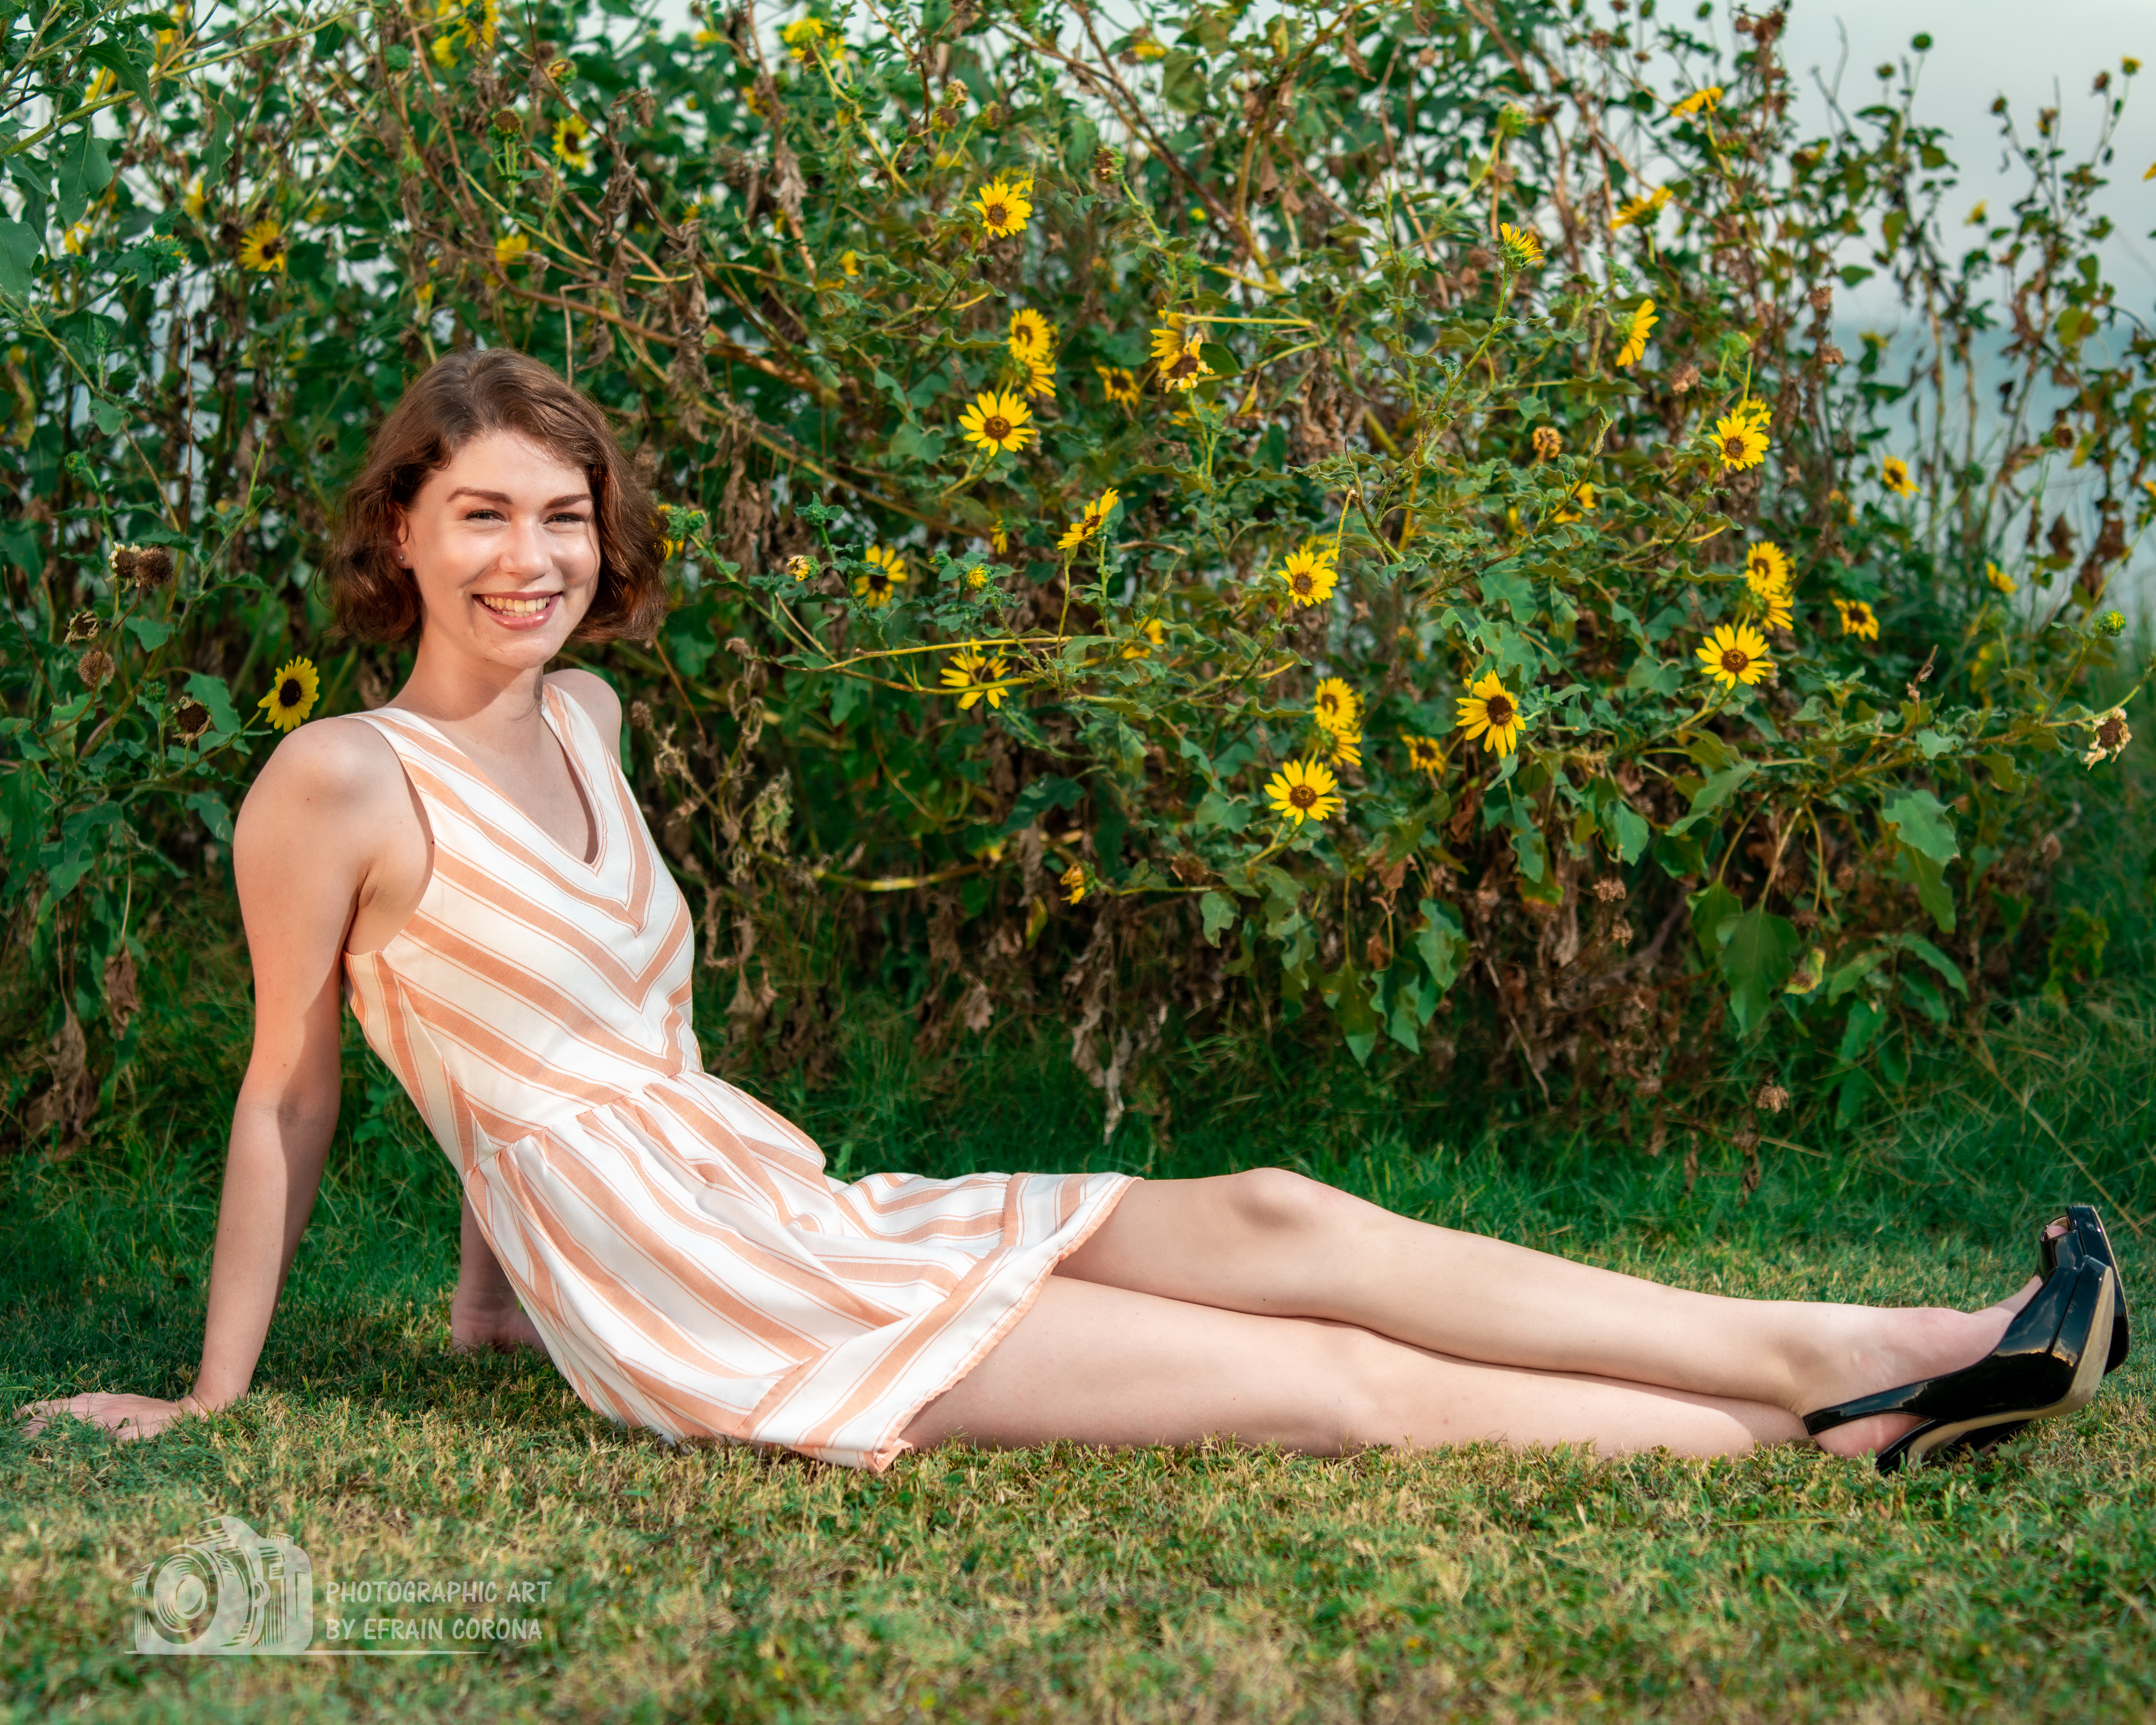 Hailey posing by sunflowers in a peach striped dress.